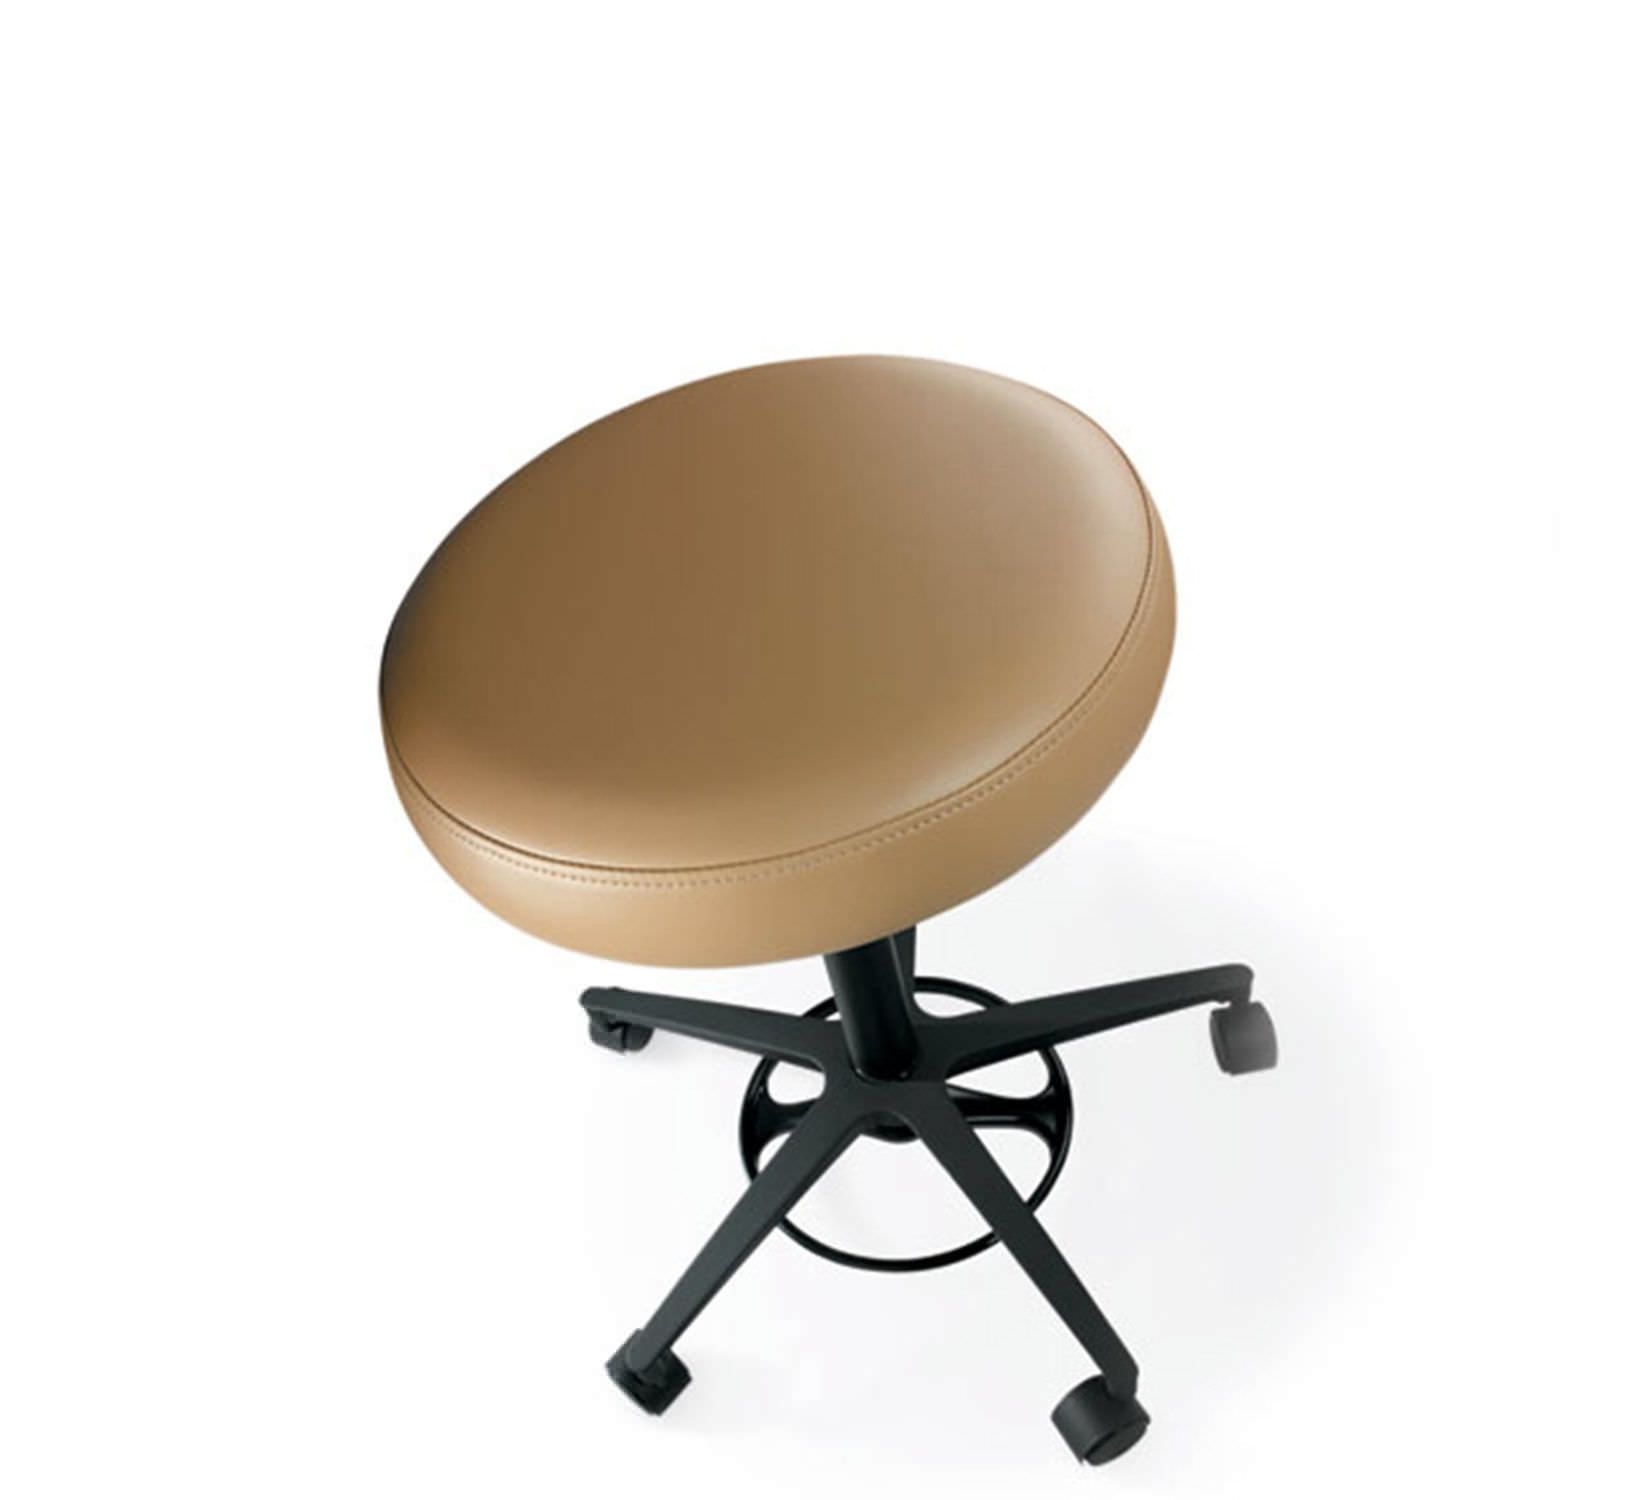 Medical stool / height-adjustable / on casters / rotating HMSF1M La-Z-Boy Contract Furniture